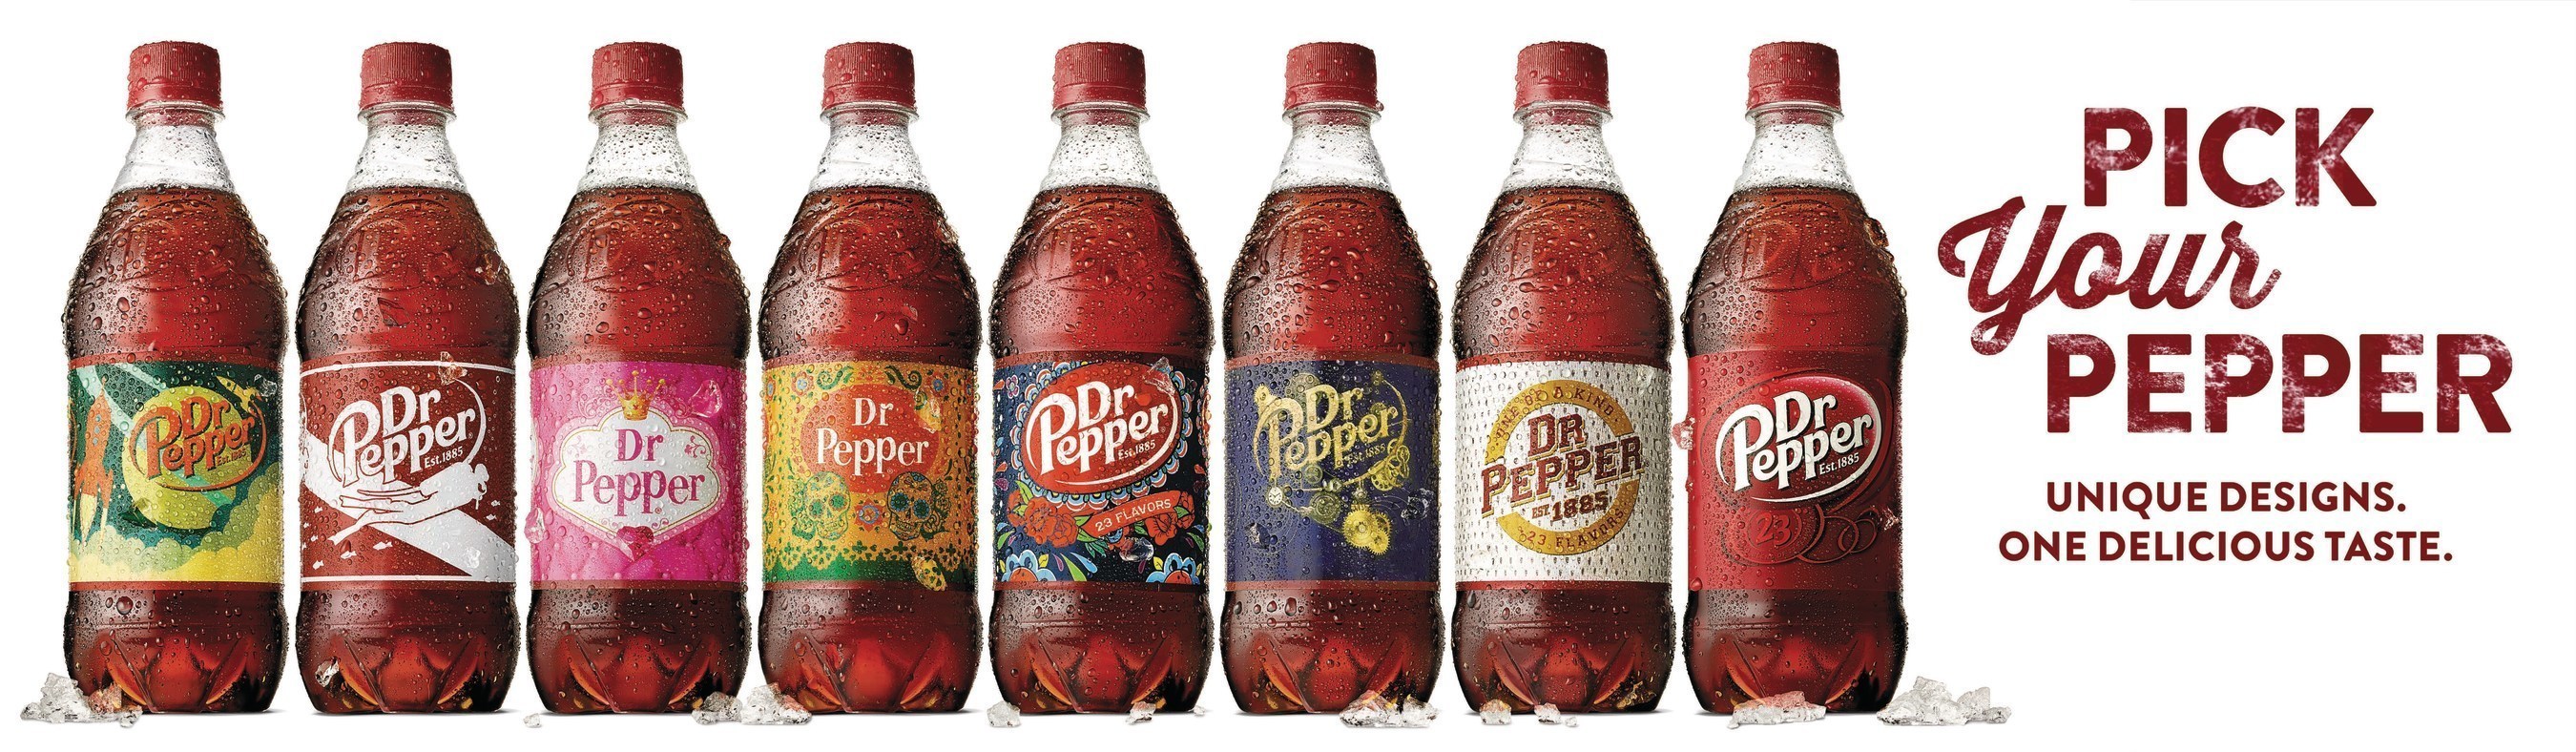 The Pick Your Pepper custom label bottles are available in stores this summer.